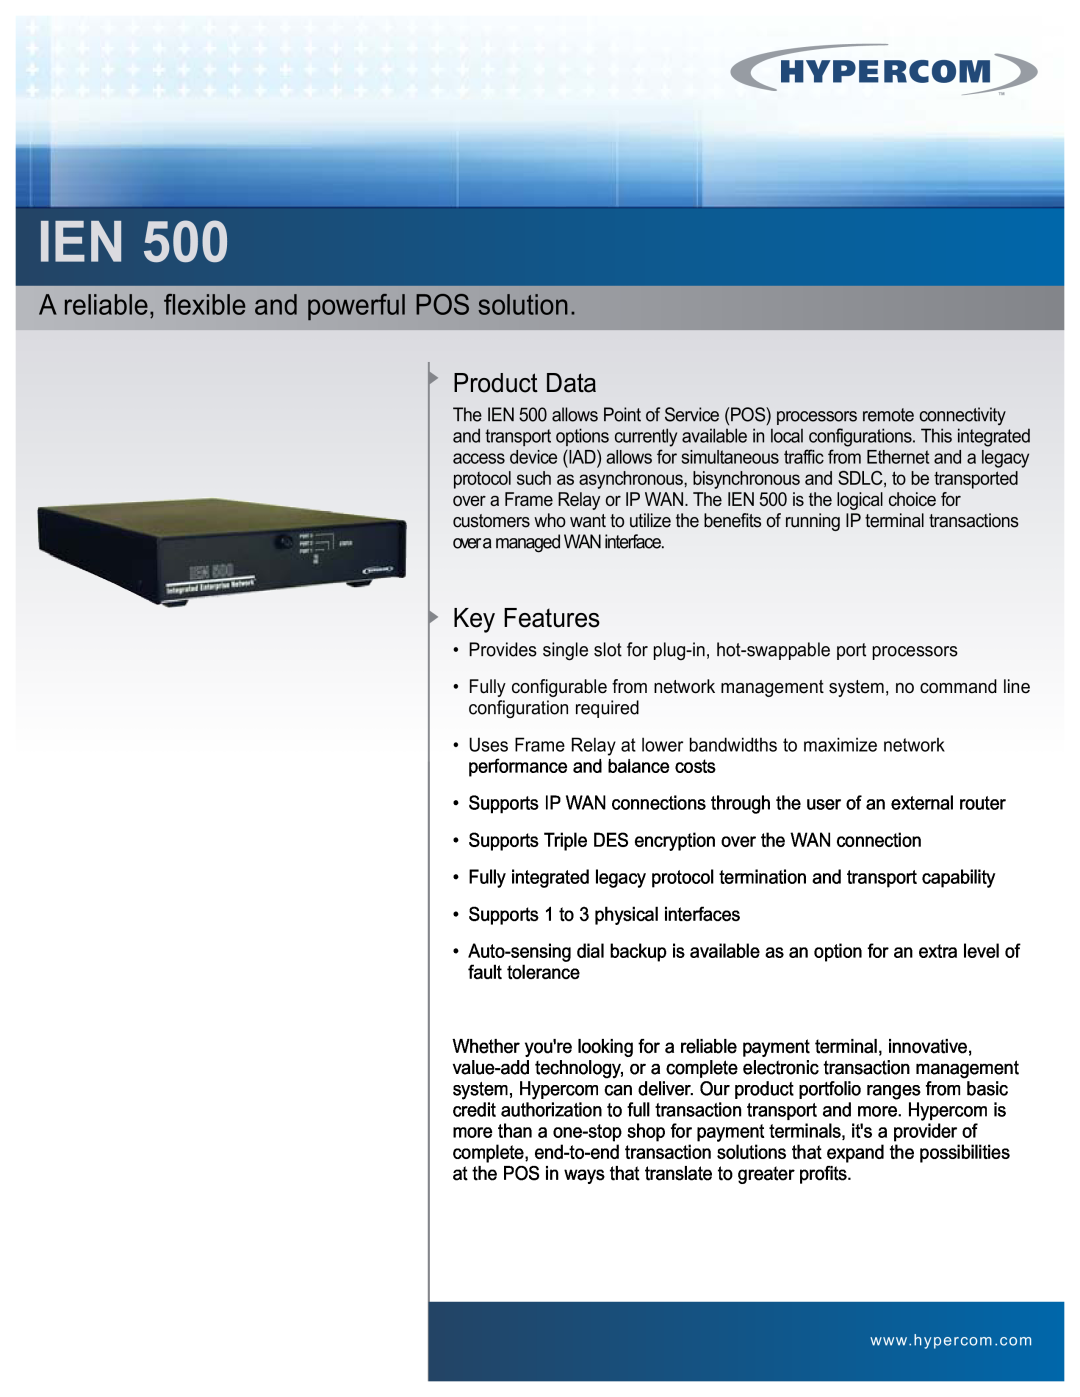 Hypercom IEN 500 manual IEN500, Product Data, Key Features, A reliable, flexible and powerful POS solution 